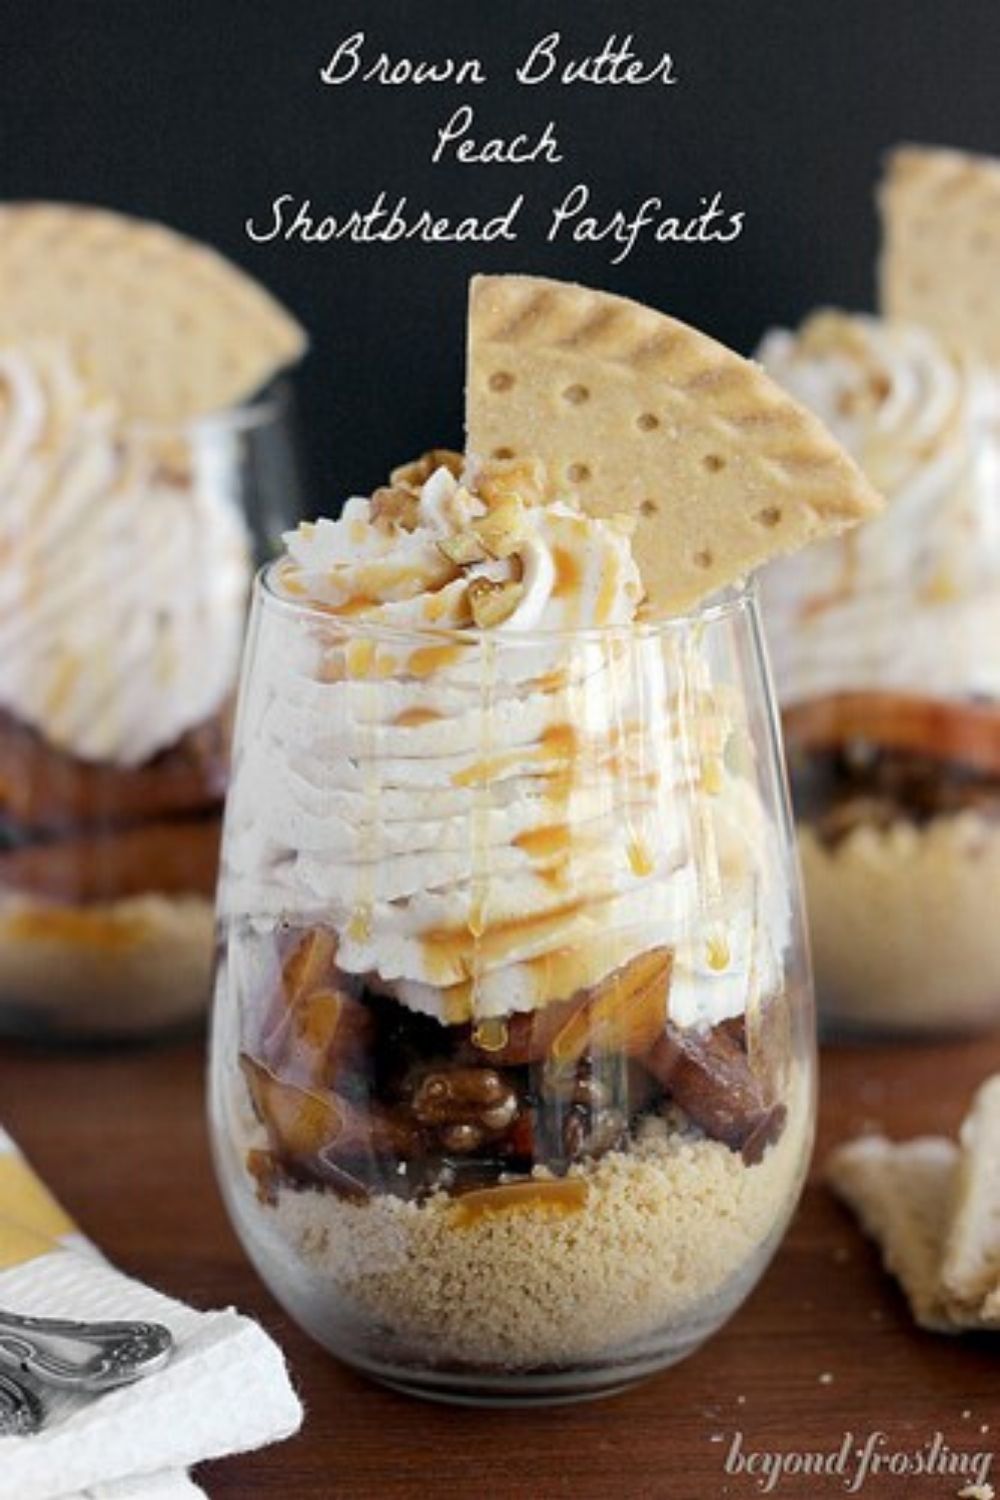 Brown Butter Peach Shortbread Parfaits by Beyond Frosting.